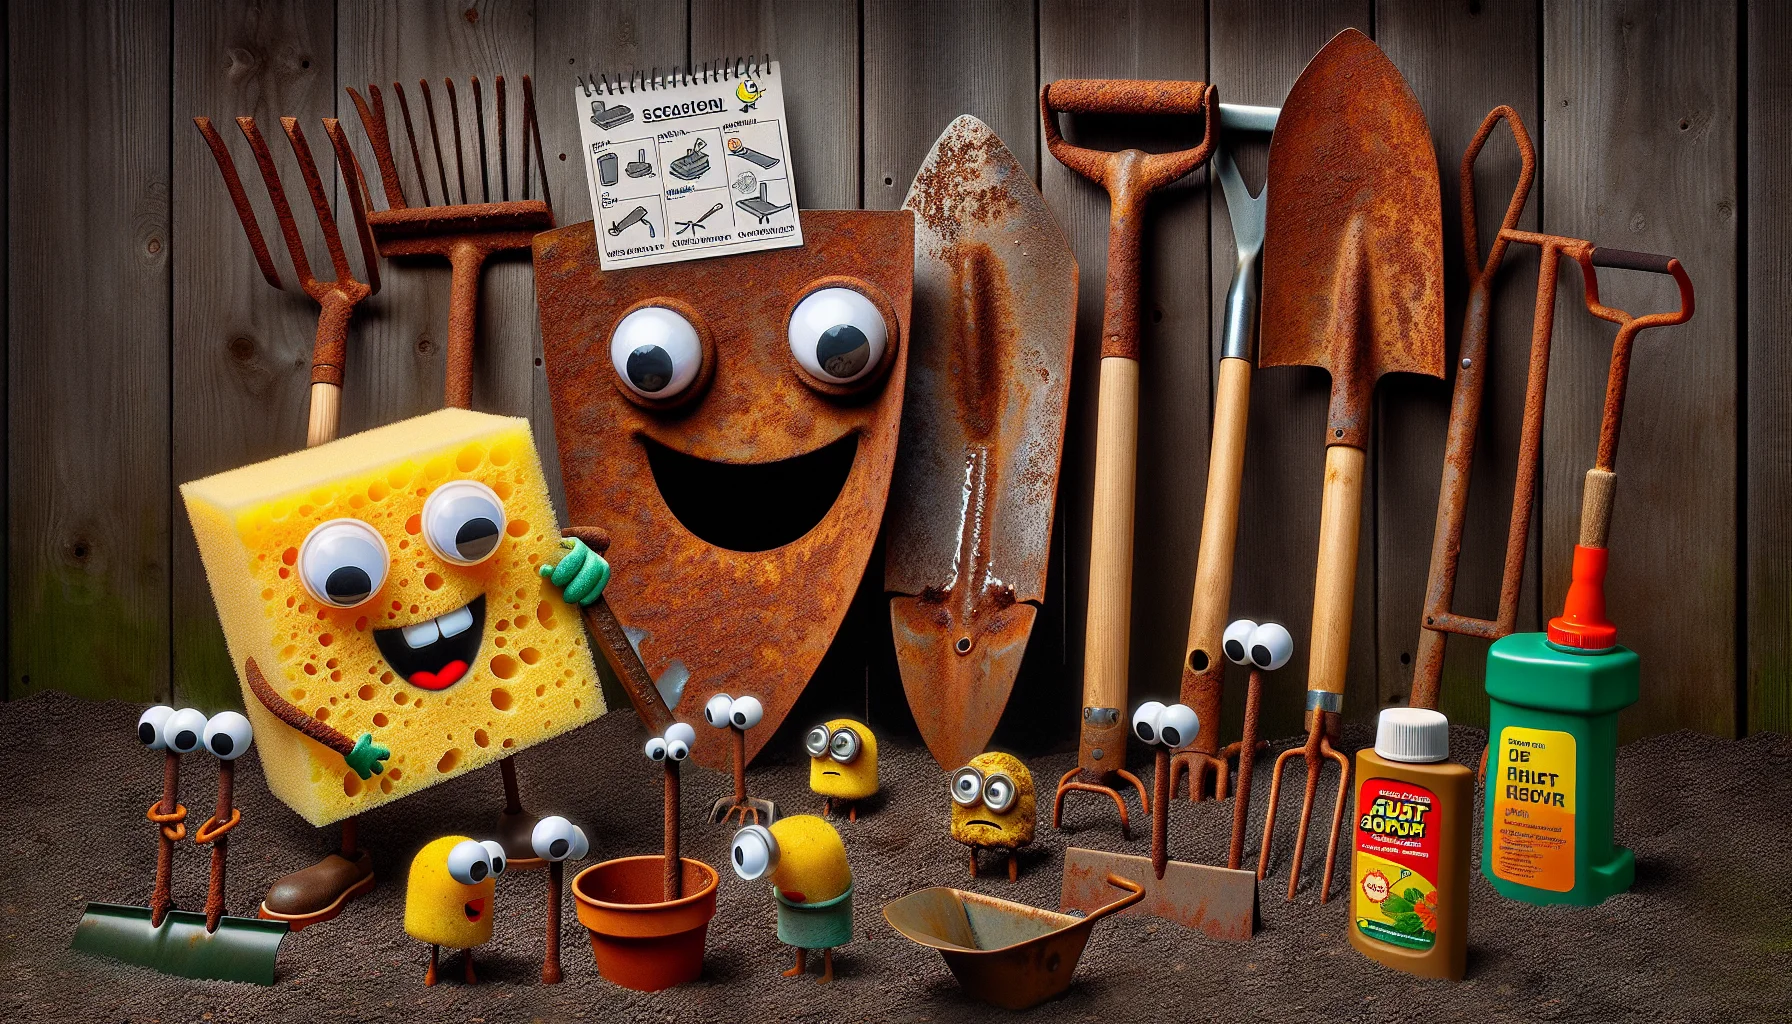 Create a humorous and eye-catching scene of a garden filled with rusty tools eagerly awaiting their revamp. An oversized sponge, with googly eyes and a broad smile, is captured in the act of scrubbing a rusted spade, both anthropomorphized to entertain the viewer. A collection of gardening tools, like a rake, trowel, and shears, watches the spectacle with expressions of surprise, laughter, or eagerness on their faces. A creatively designed step-by-step instruction pamphlet, indicating how to clean and maintain the tools, is placed next to a bottle of rust remover. This image instills an element of fun into gardening chores.